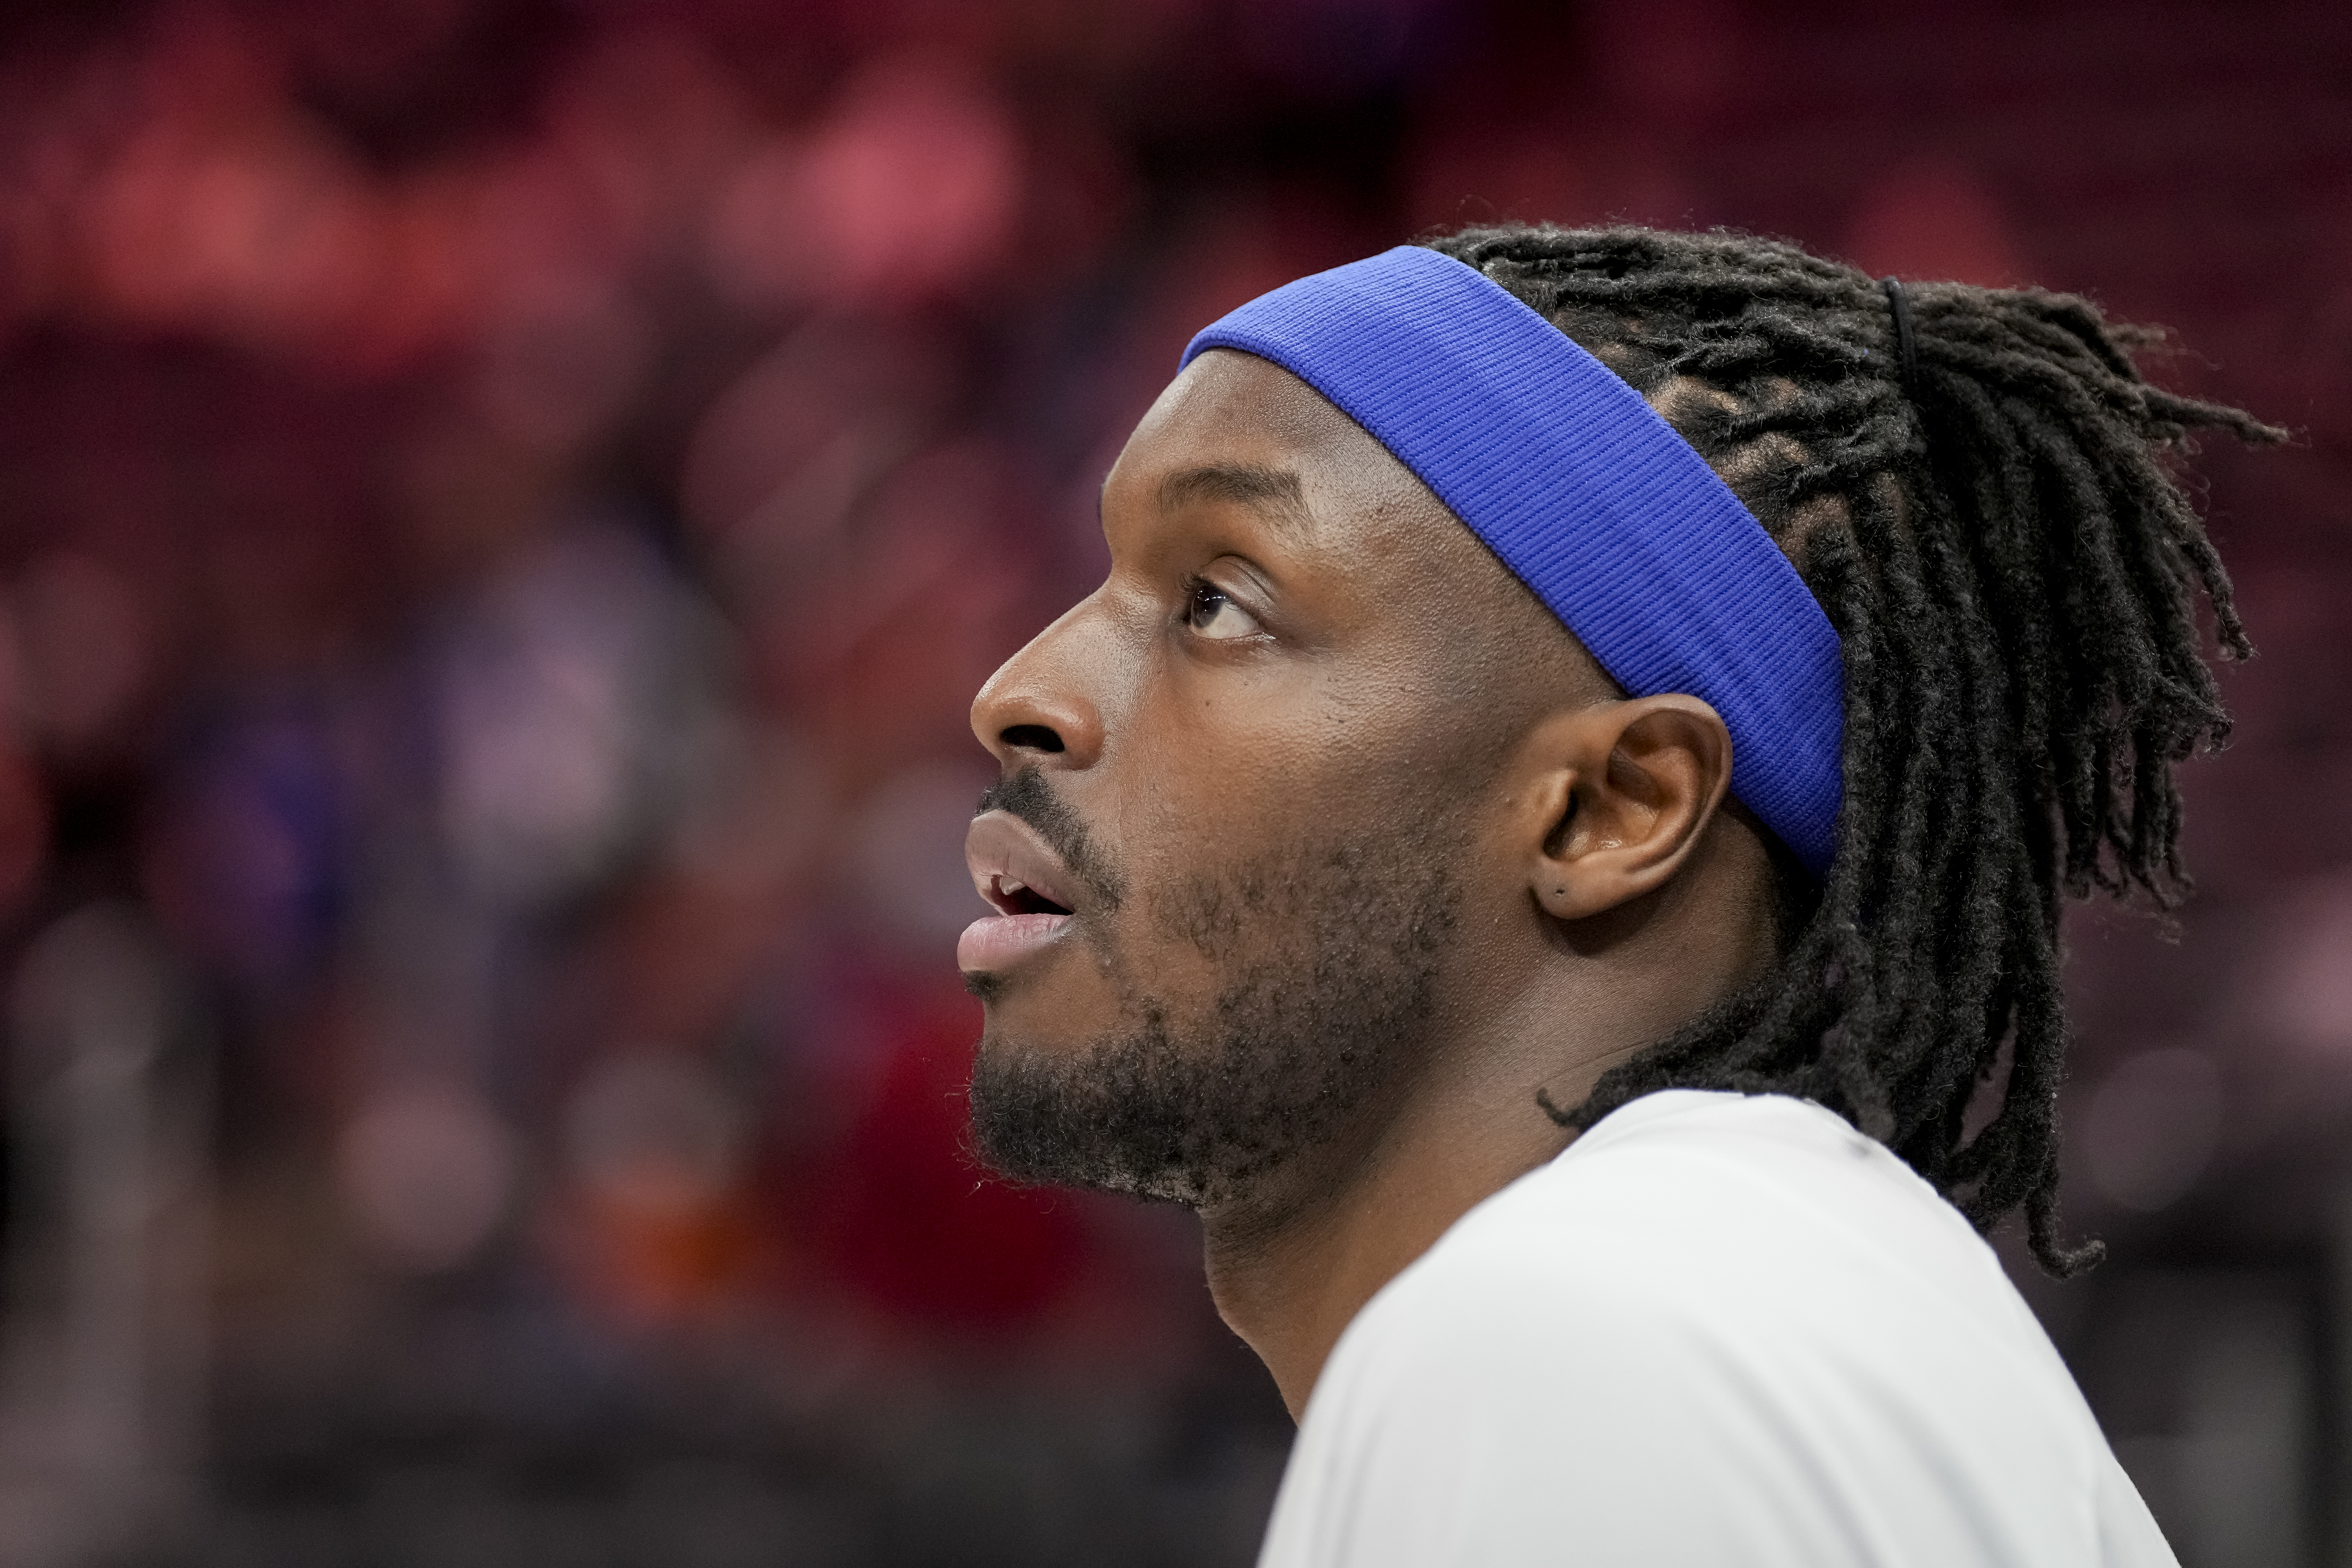 Jerami Grant #9 of the Detroit Pistons looks on before the game against the Washington Wizards at Little Caesars Arena on March 25, 2022 in Detroit, Michigan.